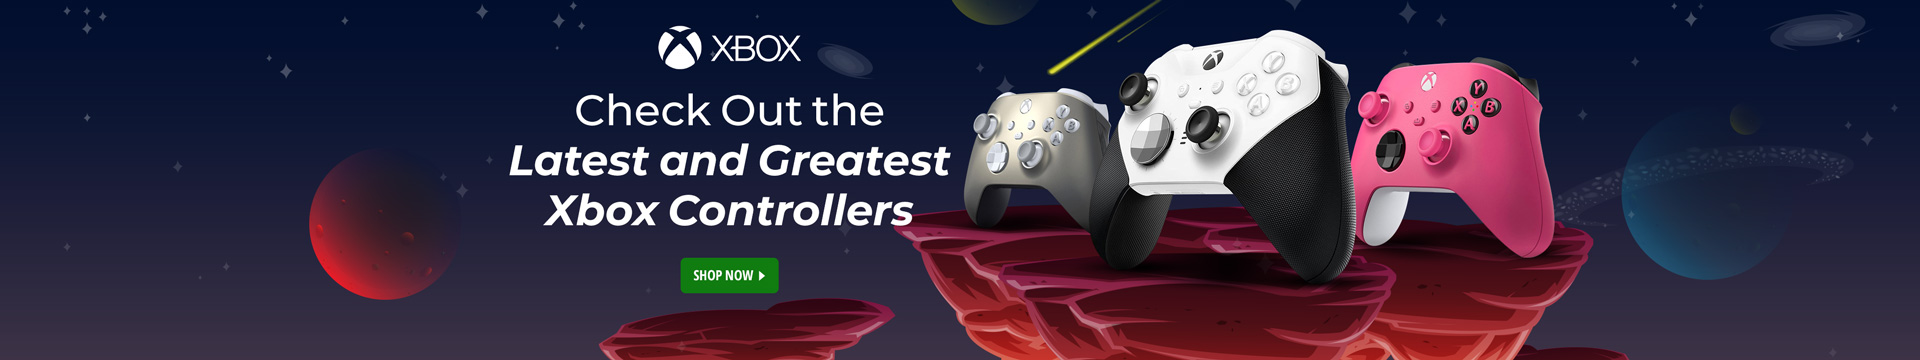 XBOX Check Out the Latest and Greatest Xbox Controllers